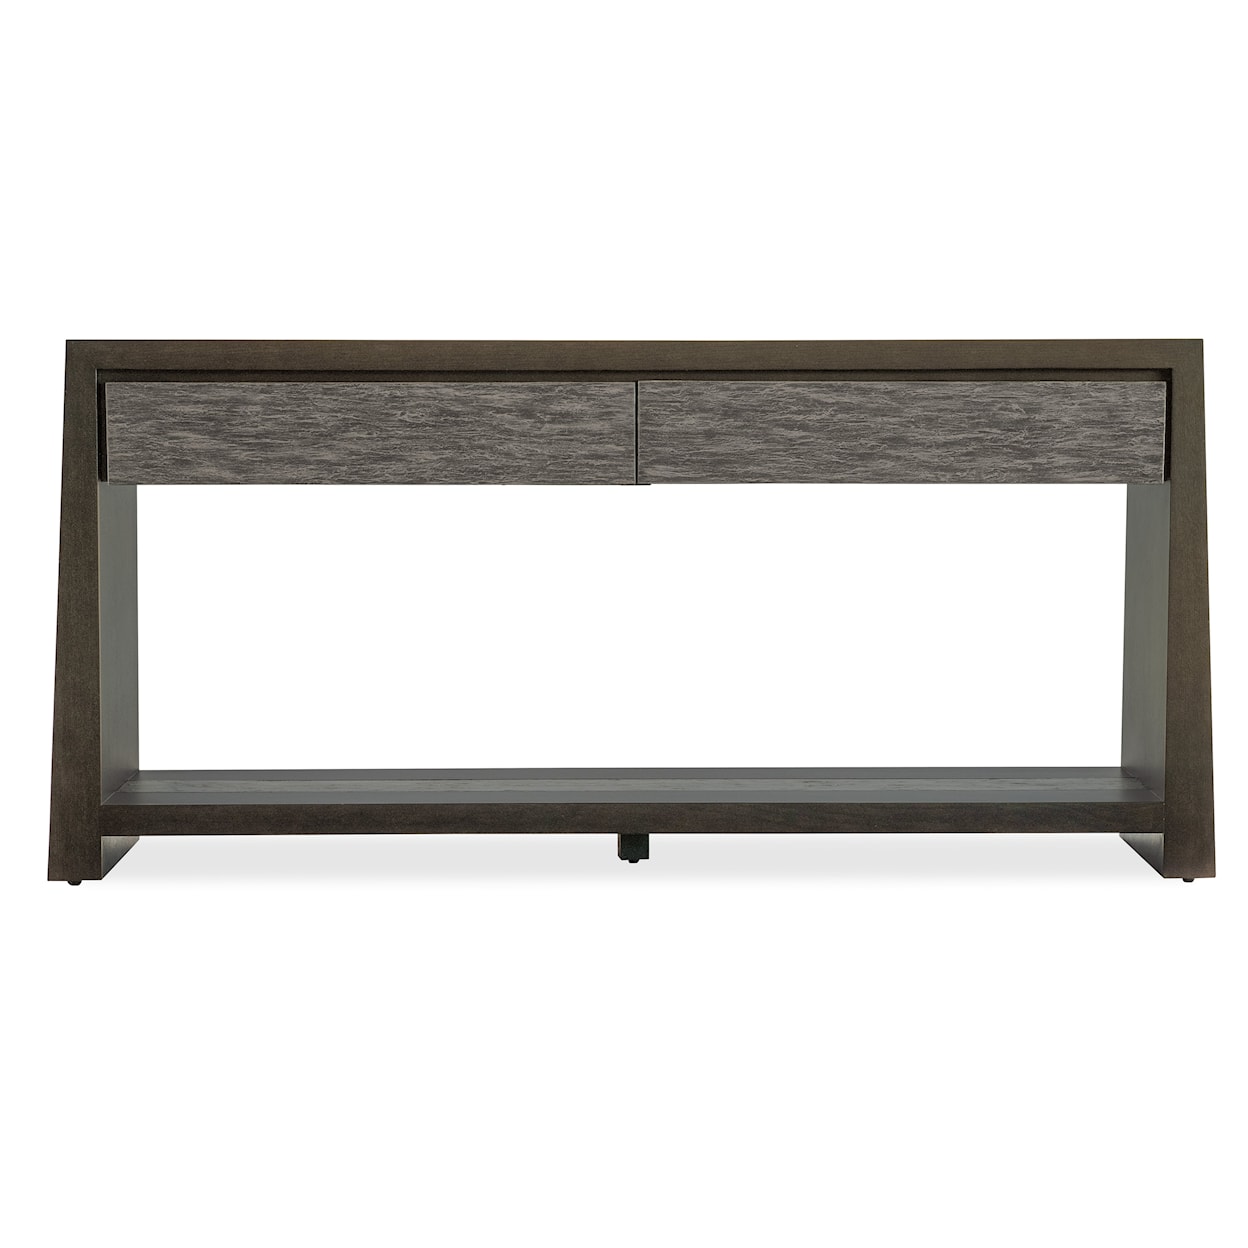 Hooker Furniture Commerce and Market Console Table